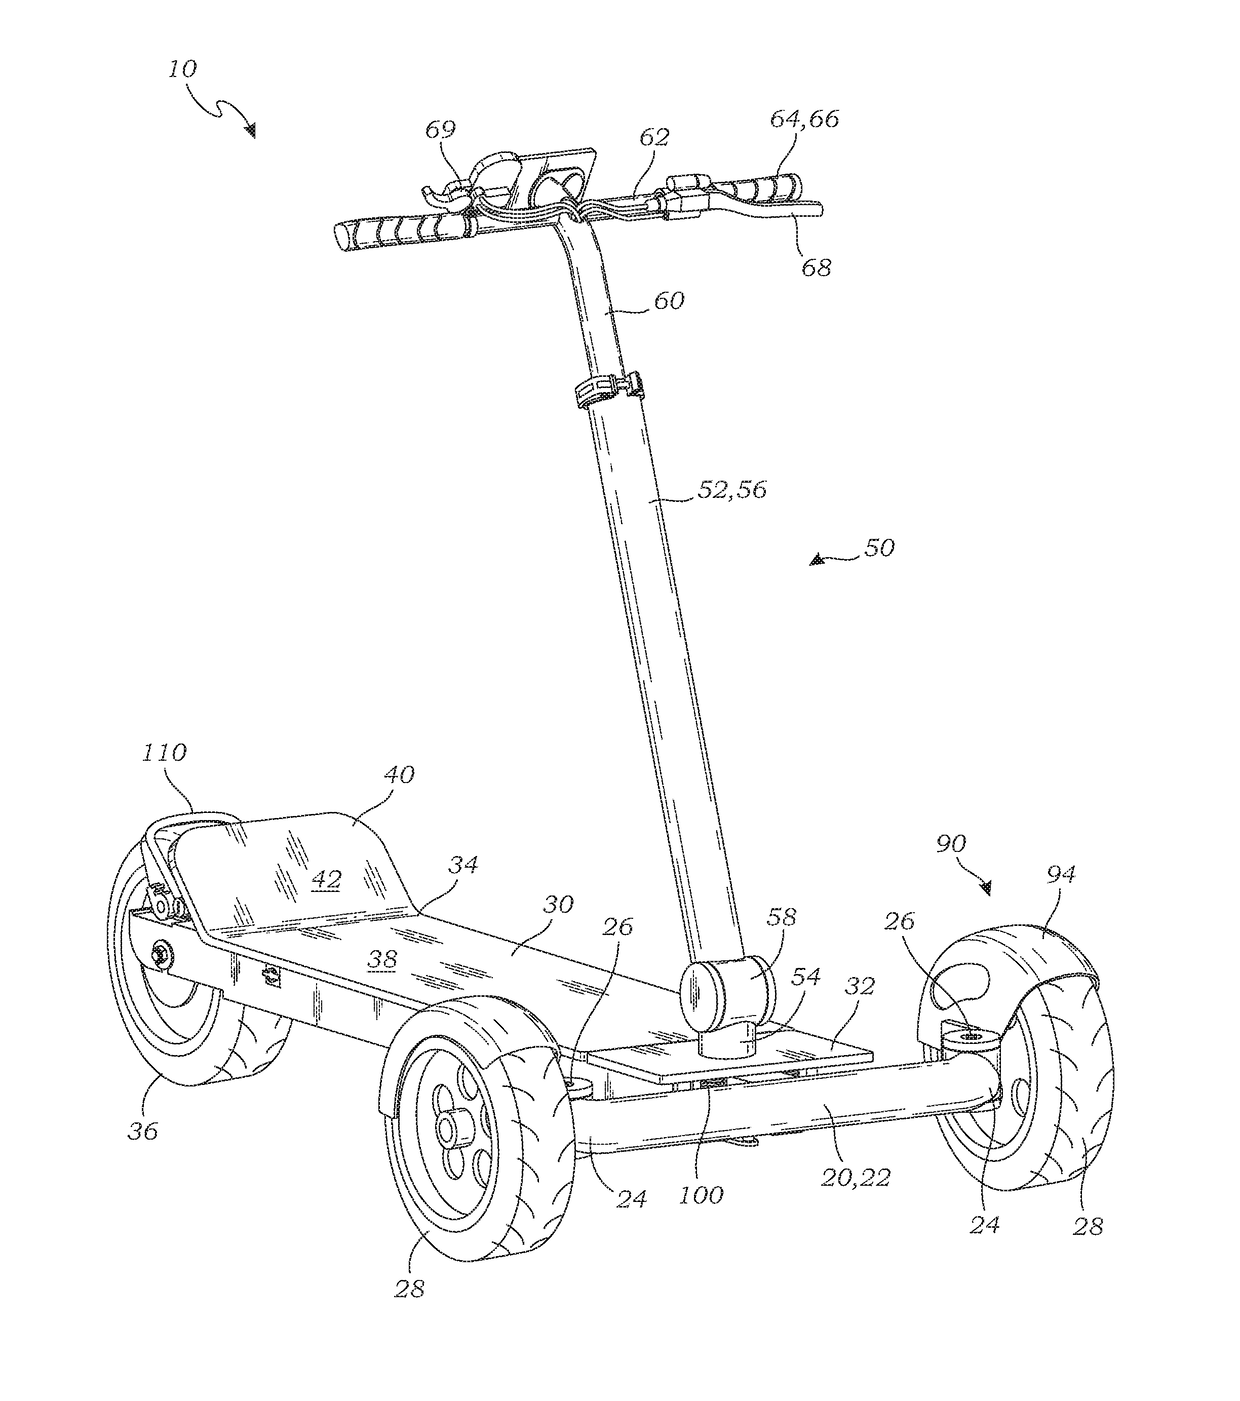 Scooter and steering system